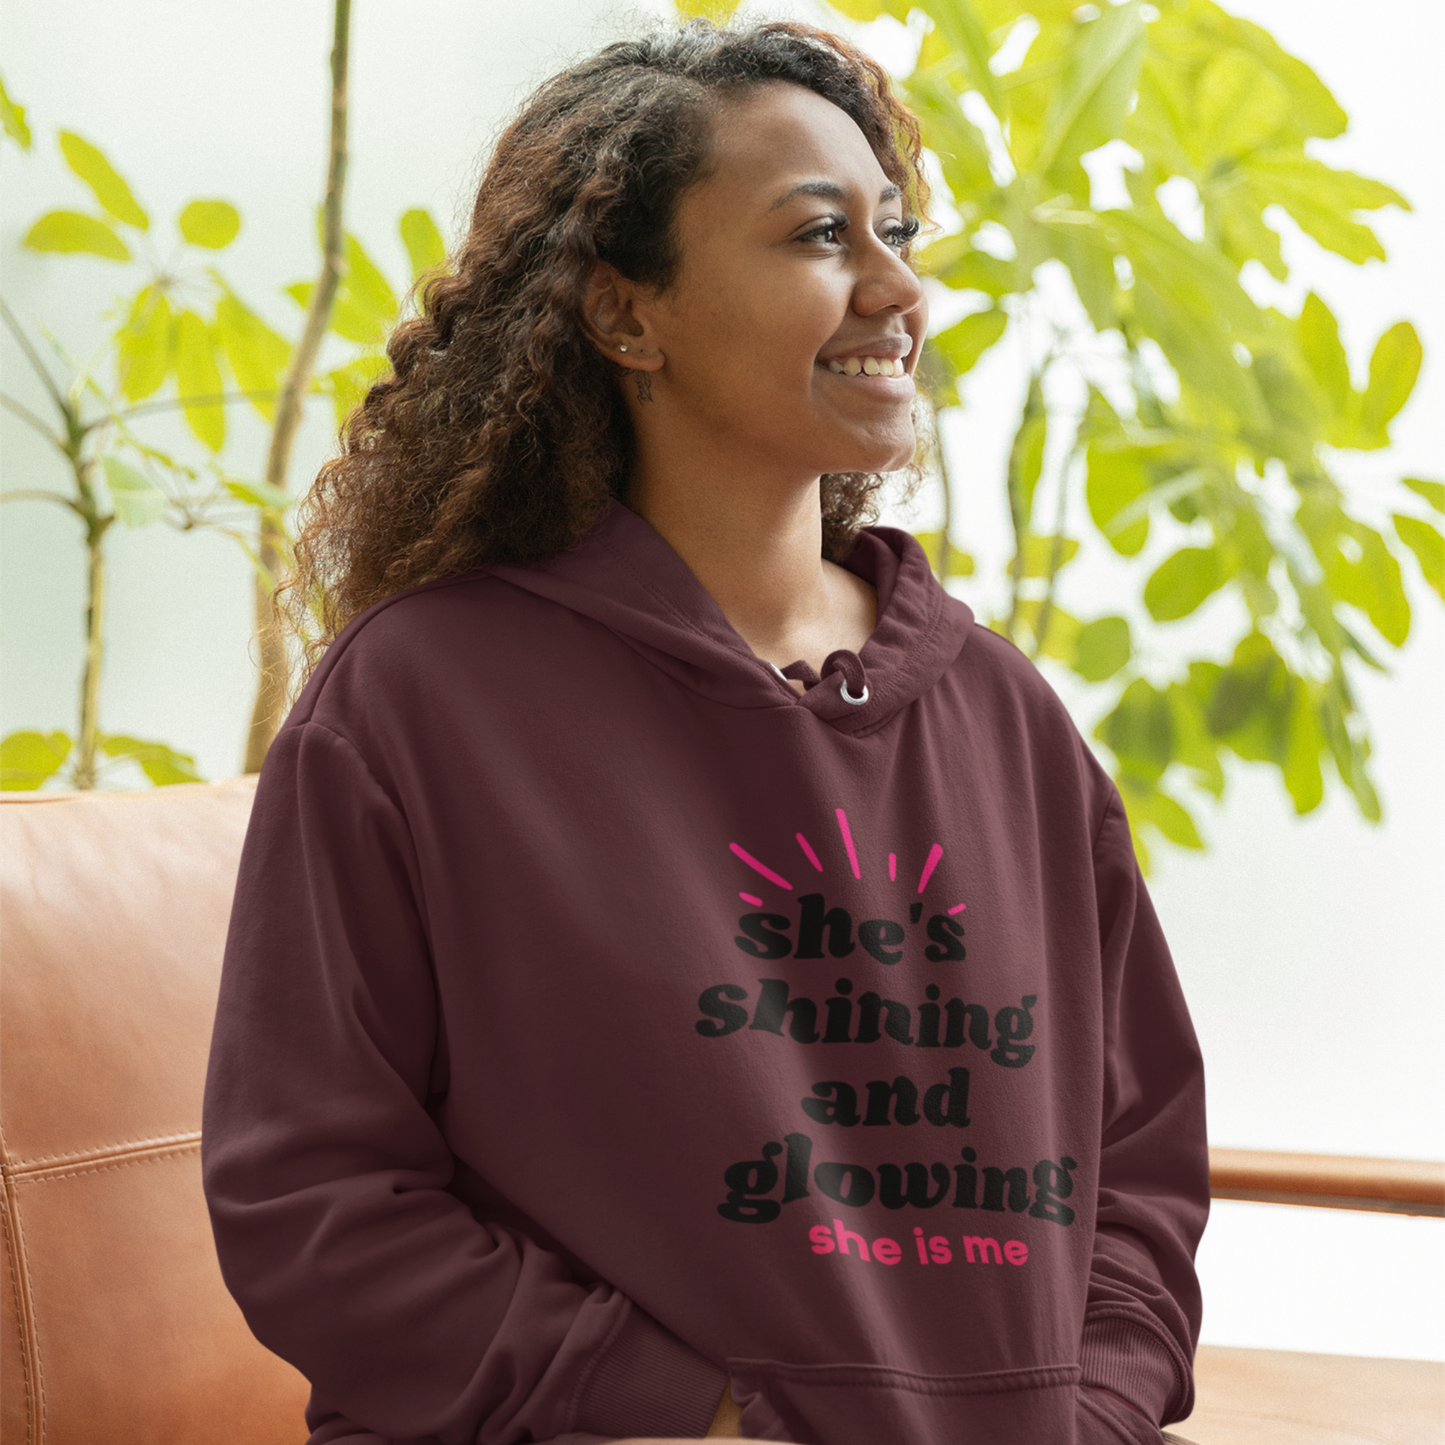 She’s Shining and Glowing: She is Me (Graphic Black & Fuchsia Text) Unisex Heavy Blend Hoodie - Style: Gildan 18500